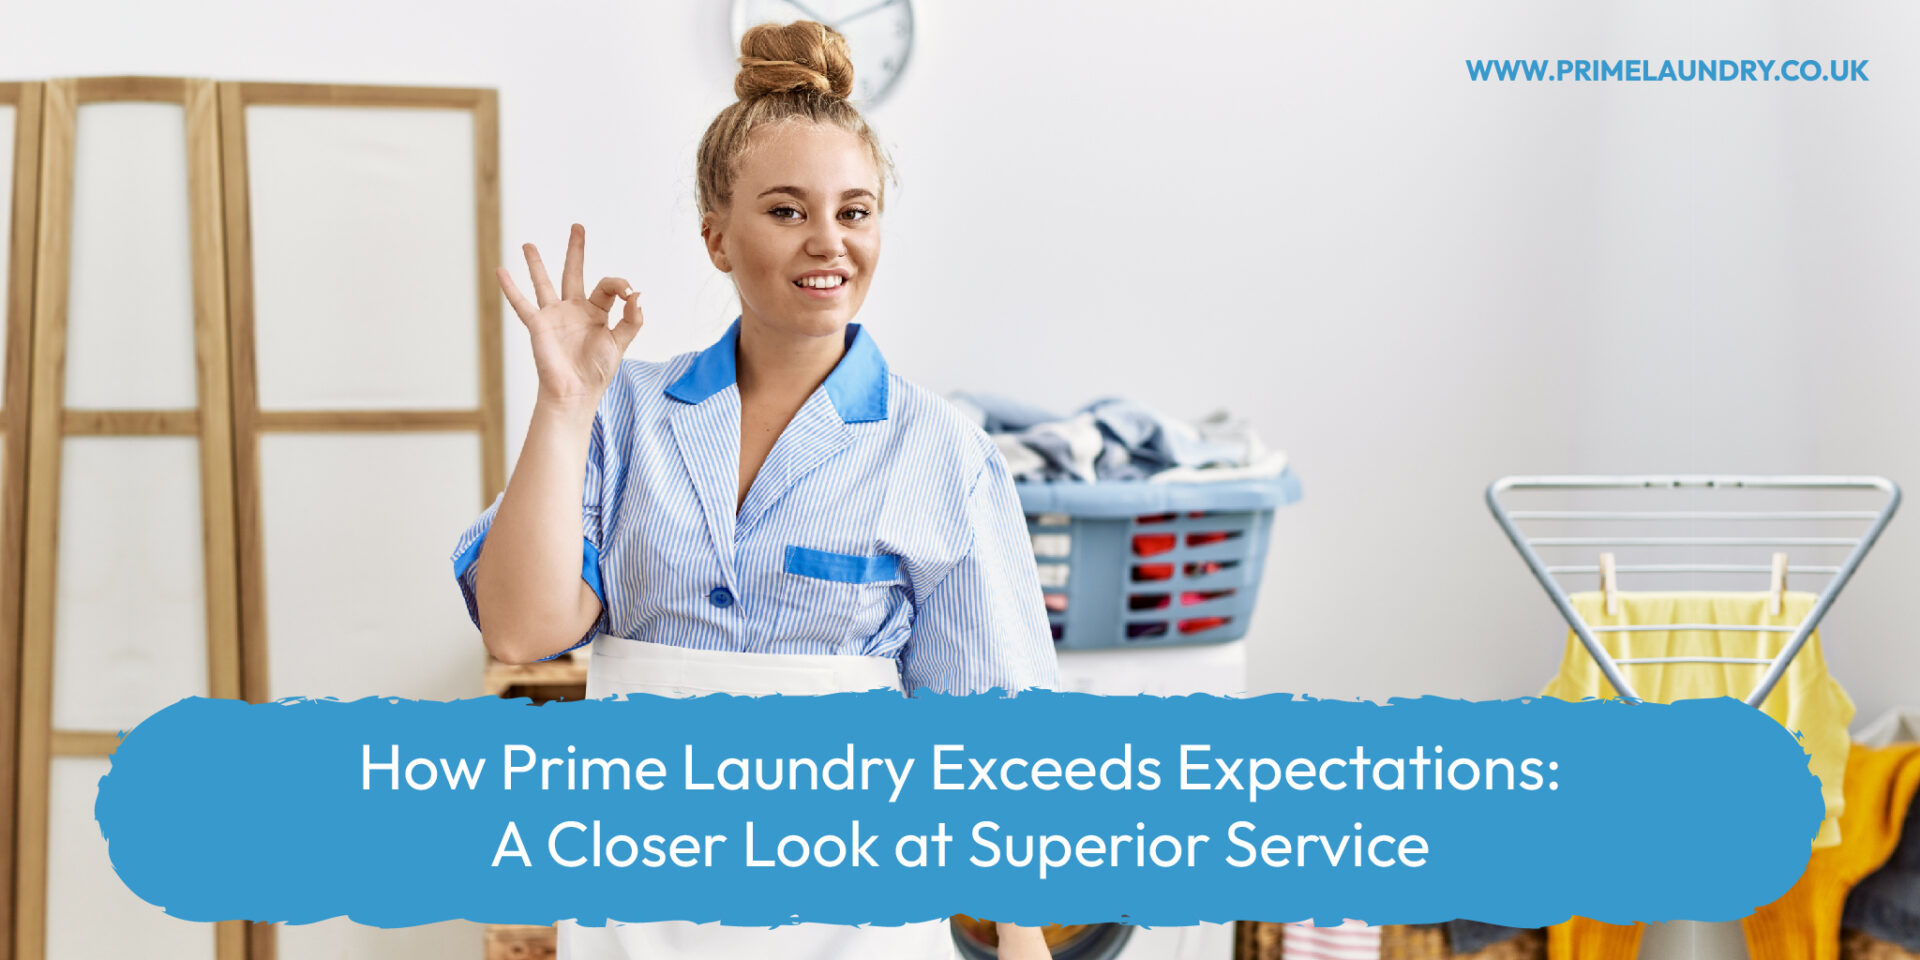 How Prime Laundry Exceeds Expectations: A Closer Look at Superior Service